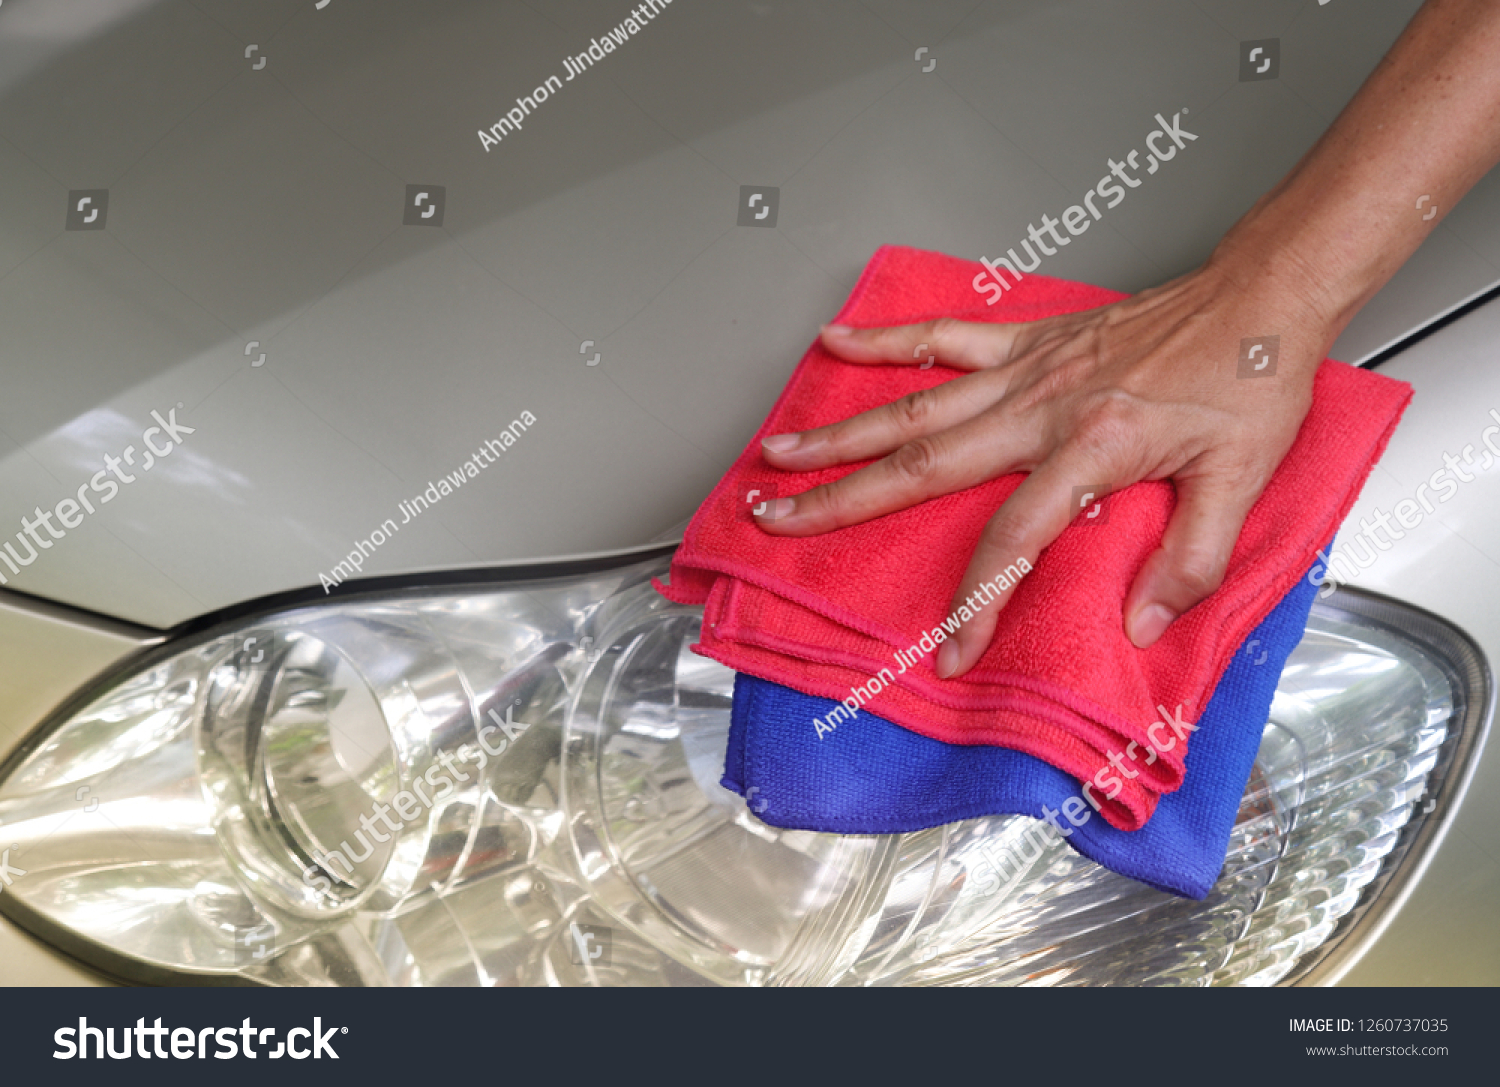 Closeup of car cleaning  with pink and blue microfiber cloths by woman owner's hand in sunny day. The lovely family activity. #1260737035